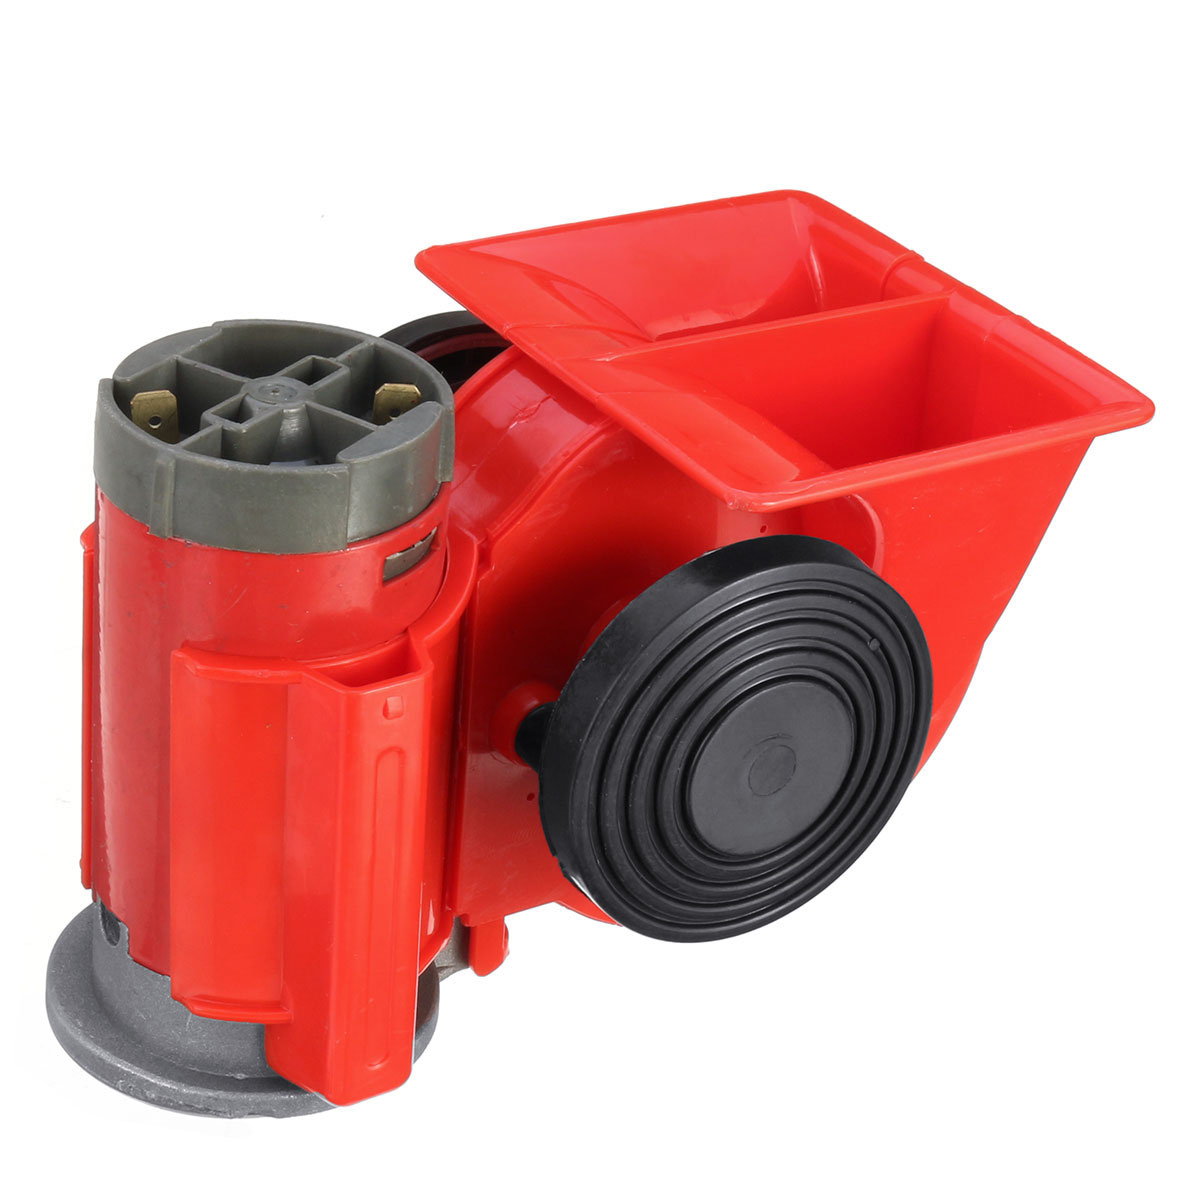 24V 300Db Red Dual Tone Electric Pump Air Loud Horn Snail Compact for Car Truck Motorcycle